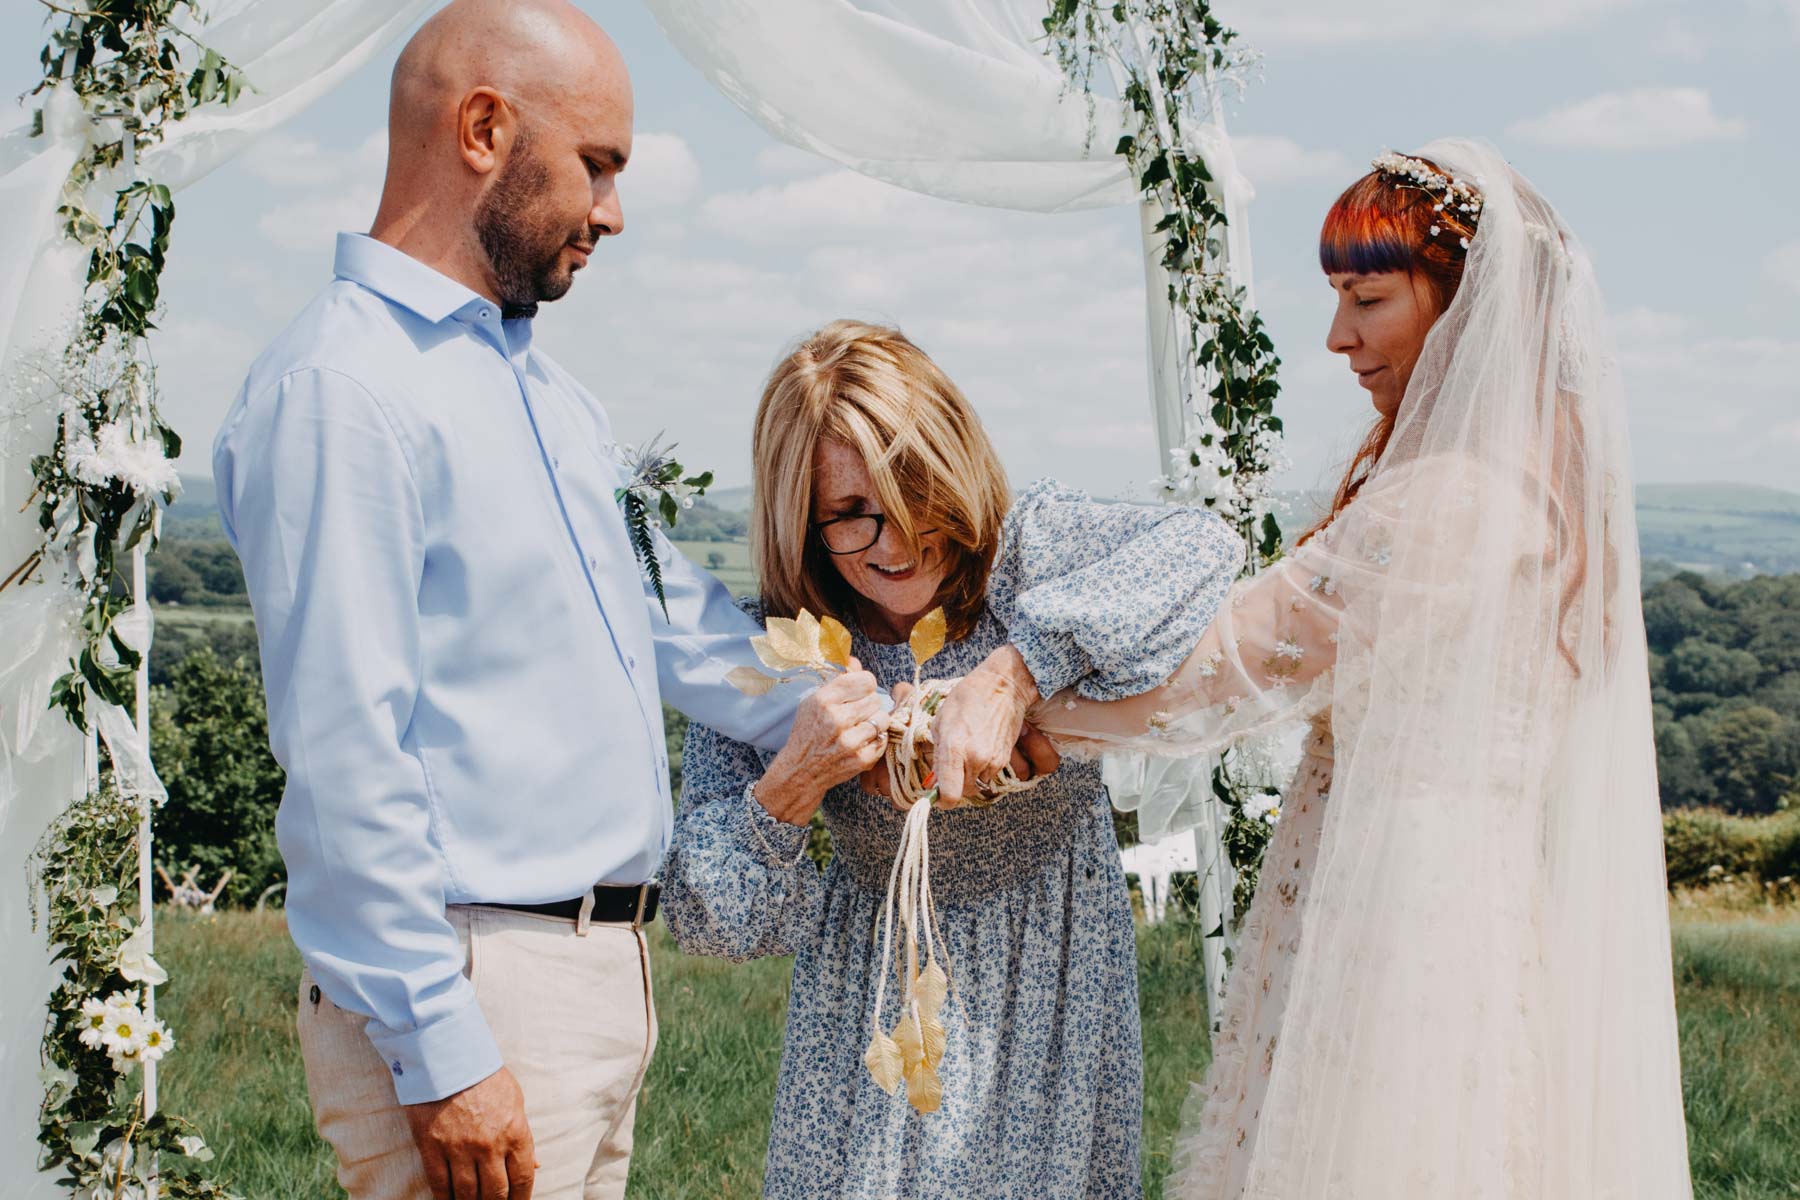 Bride and groom and celebrant binding the ribbon during the handfasting ceremony